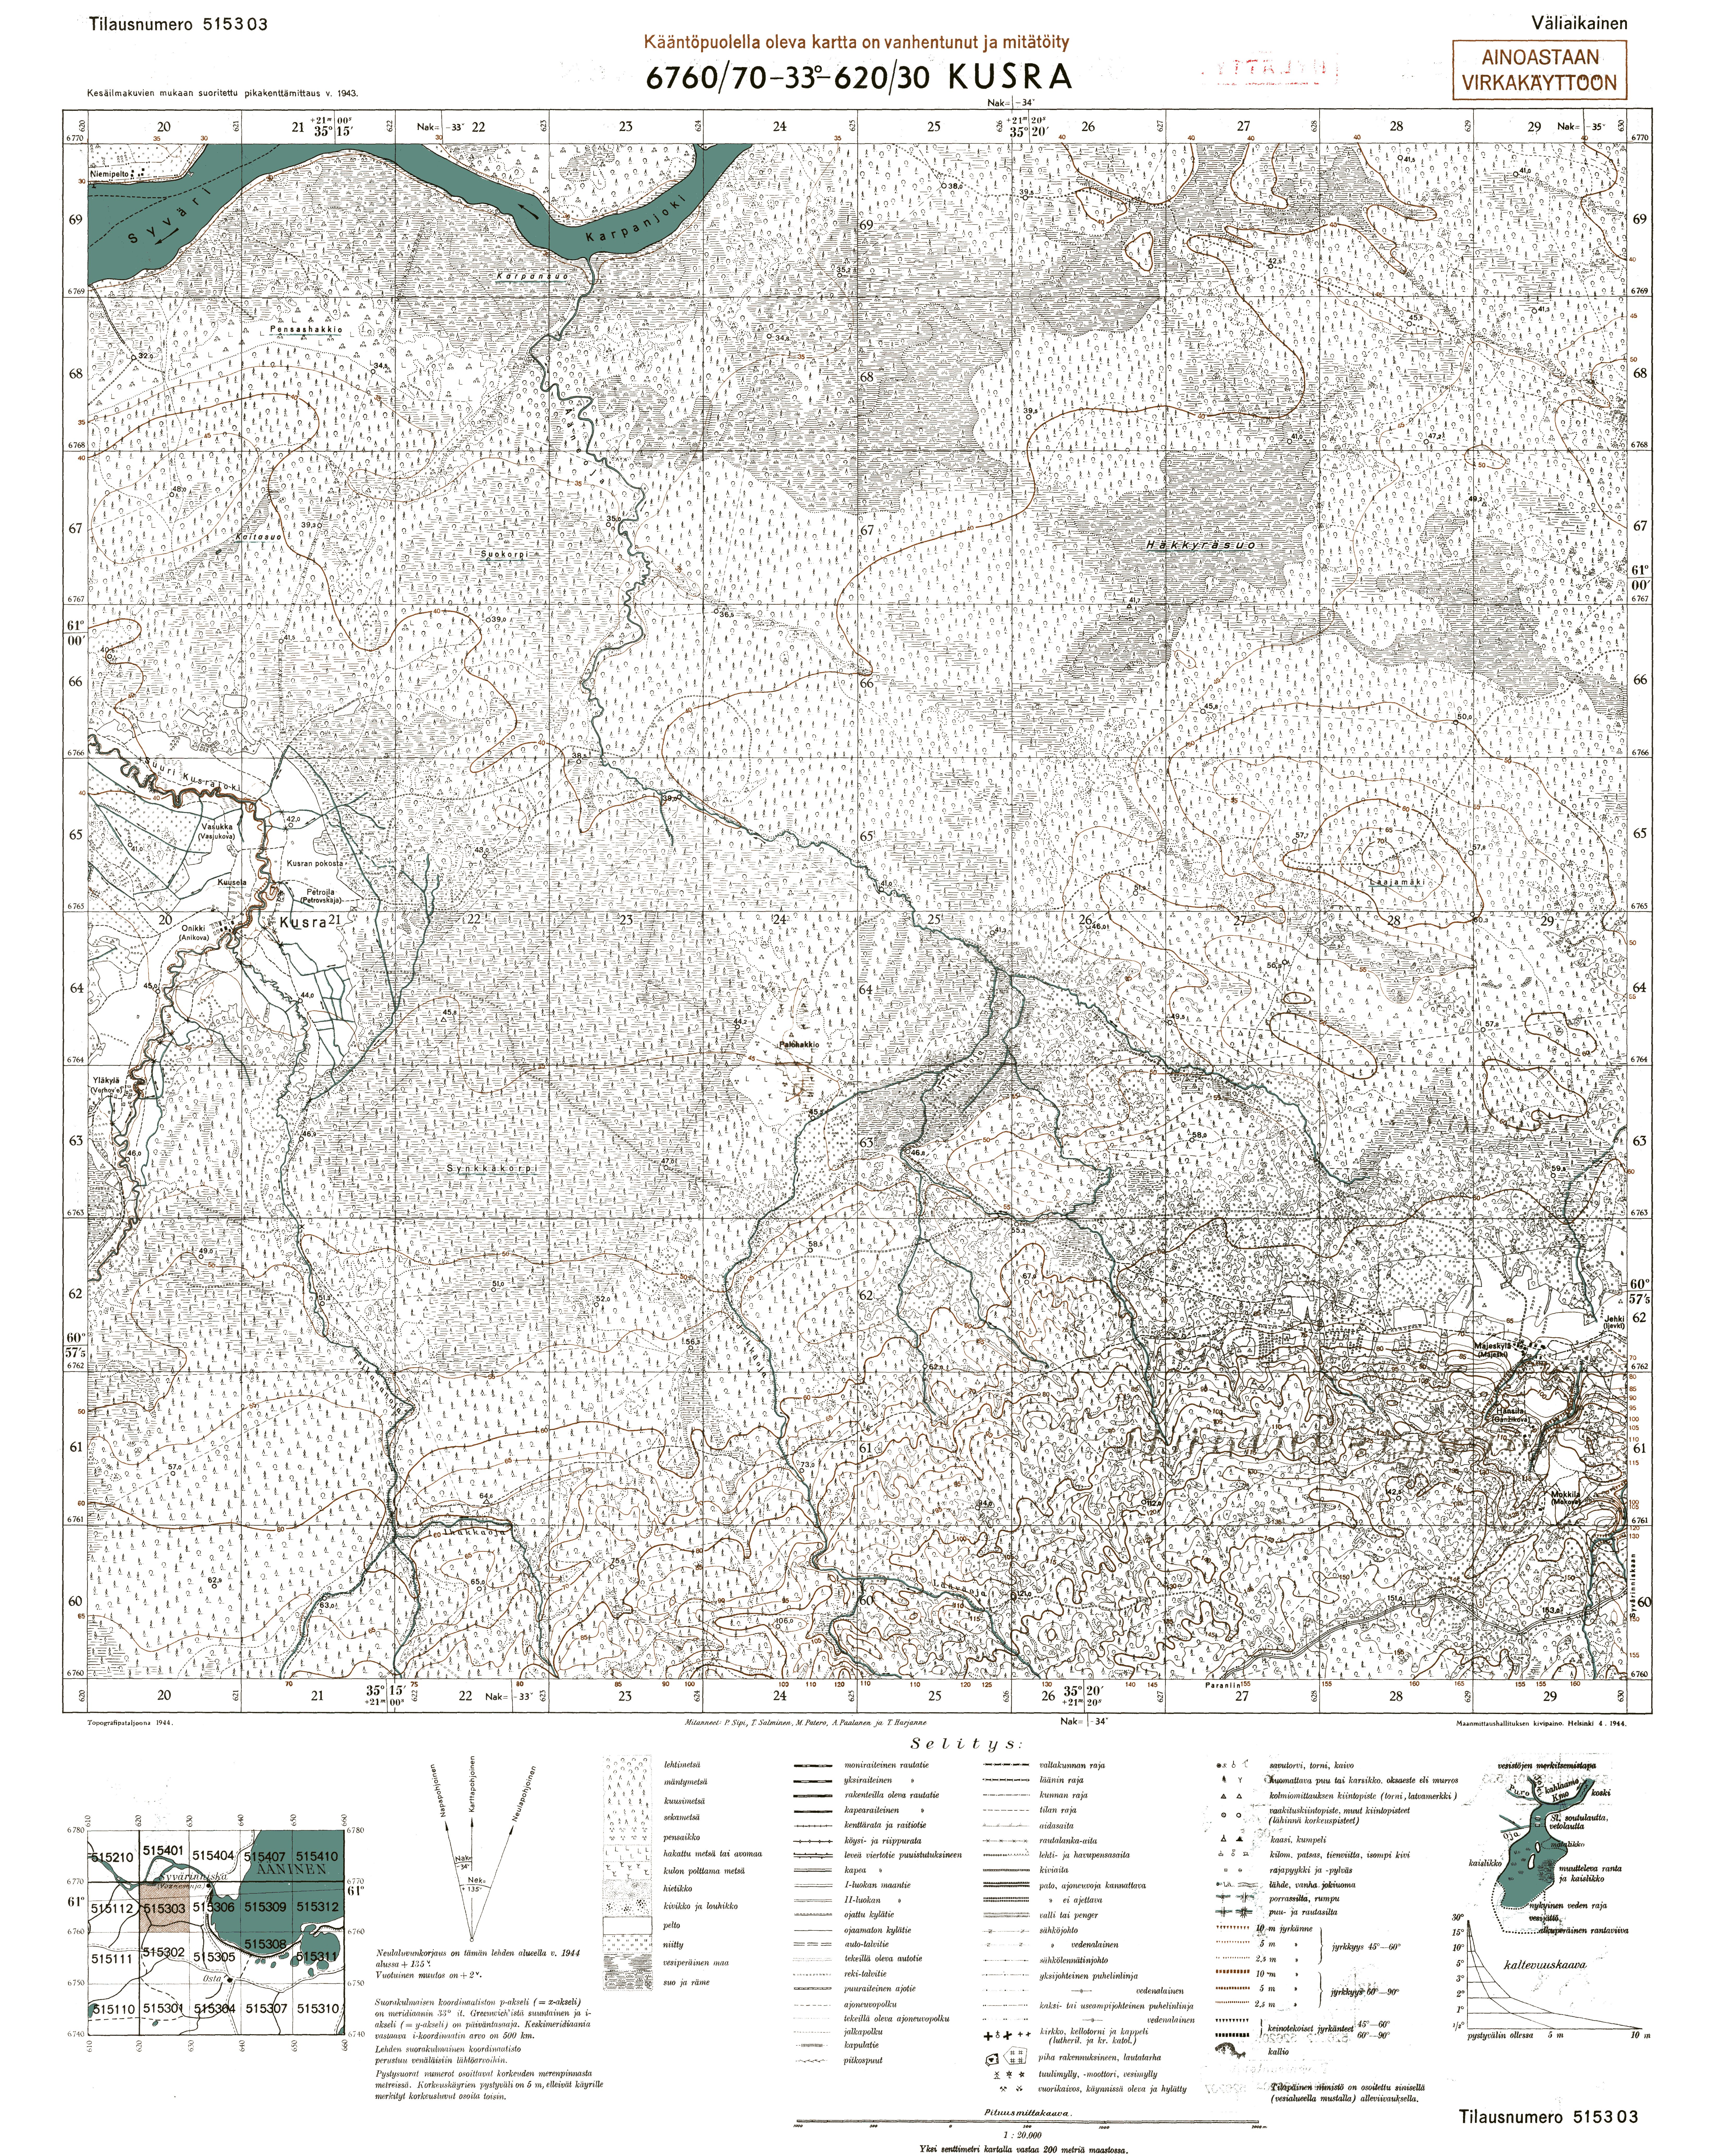 Kuzra. Kusra. Topografikartta 515303. Topographic map from 1944. Use the zooming tool to explore in higher level of detail. Obtain as a quality print or high resolution image